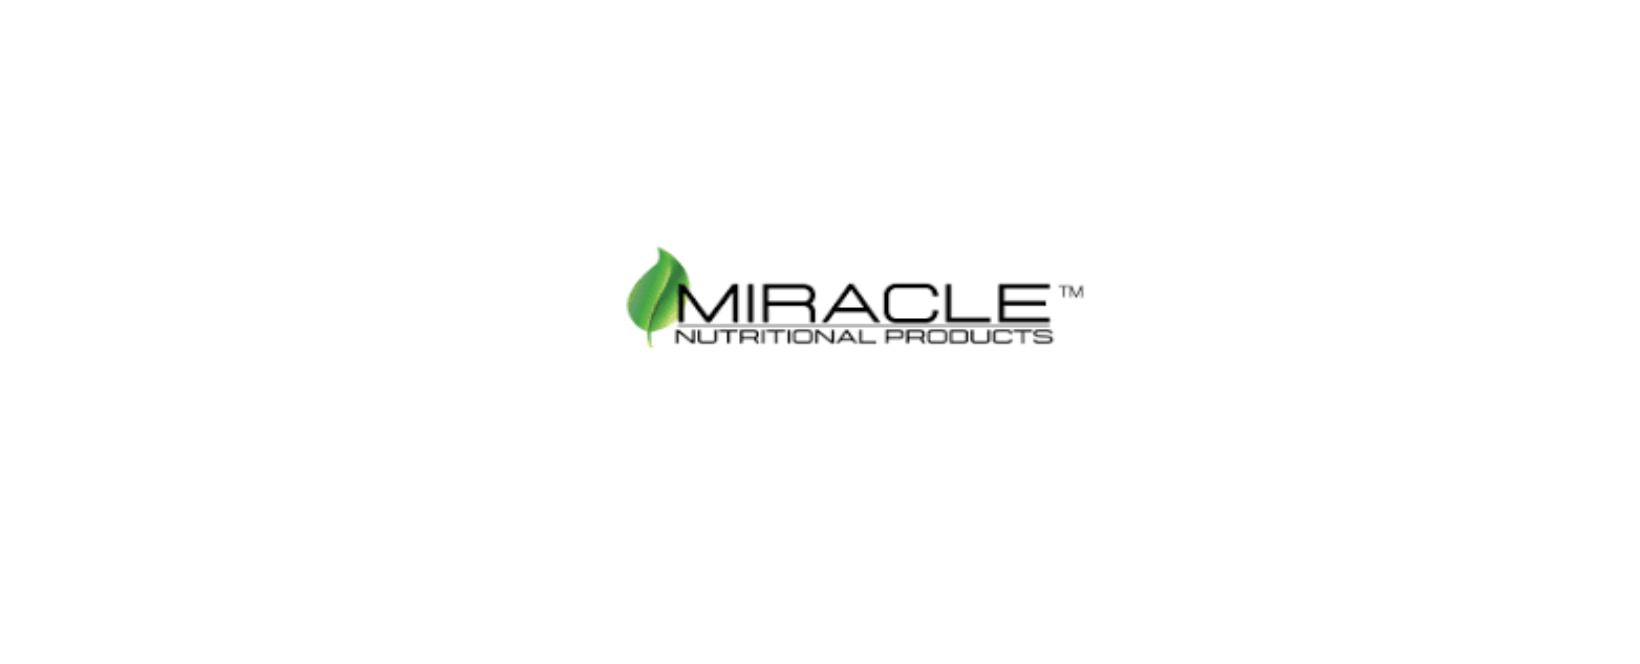 Miracle Nutritional Products Discount Code 2022